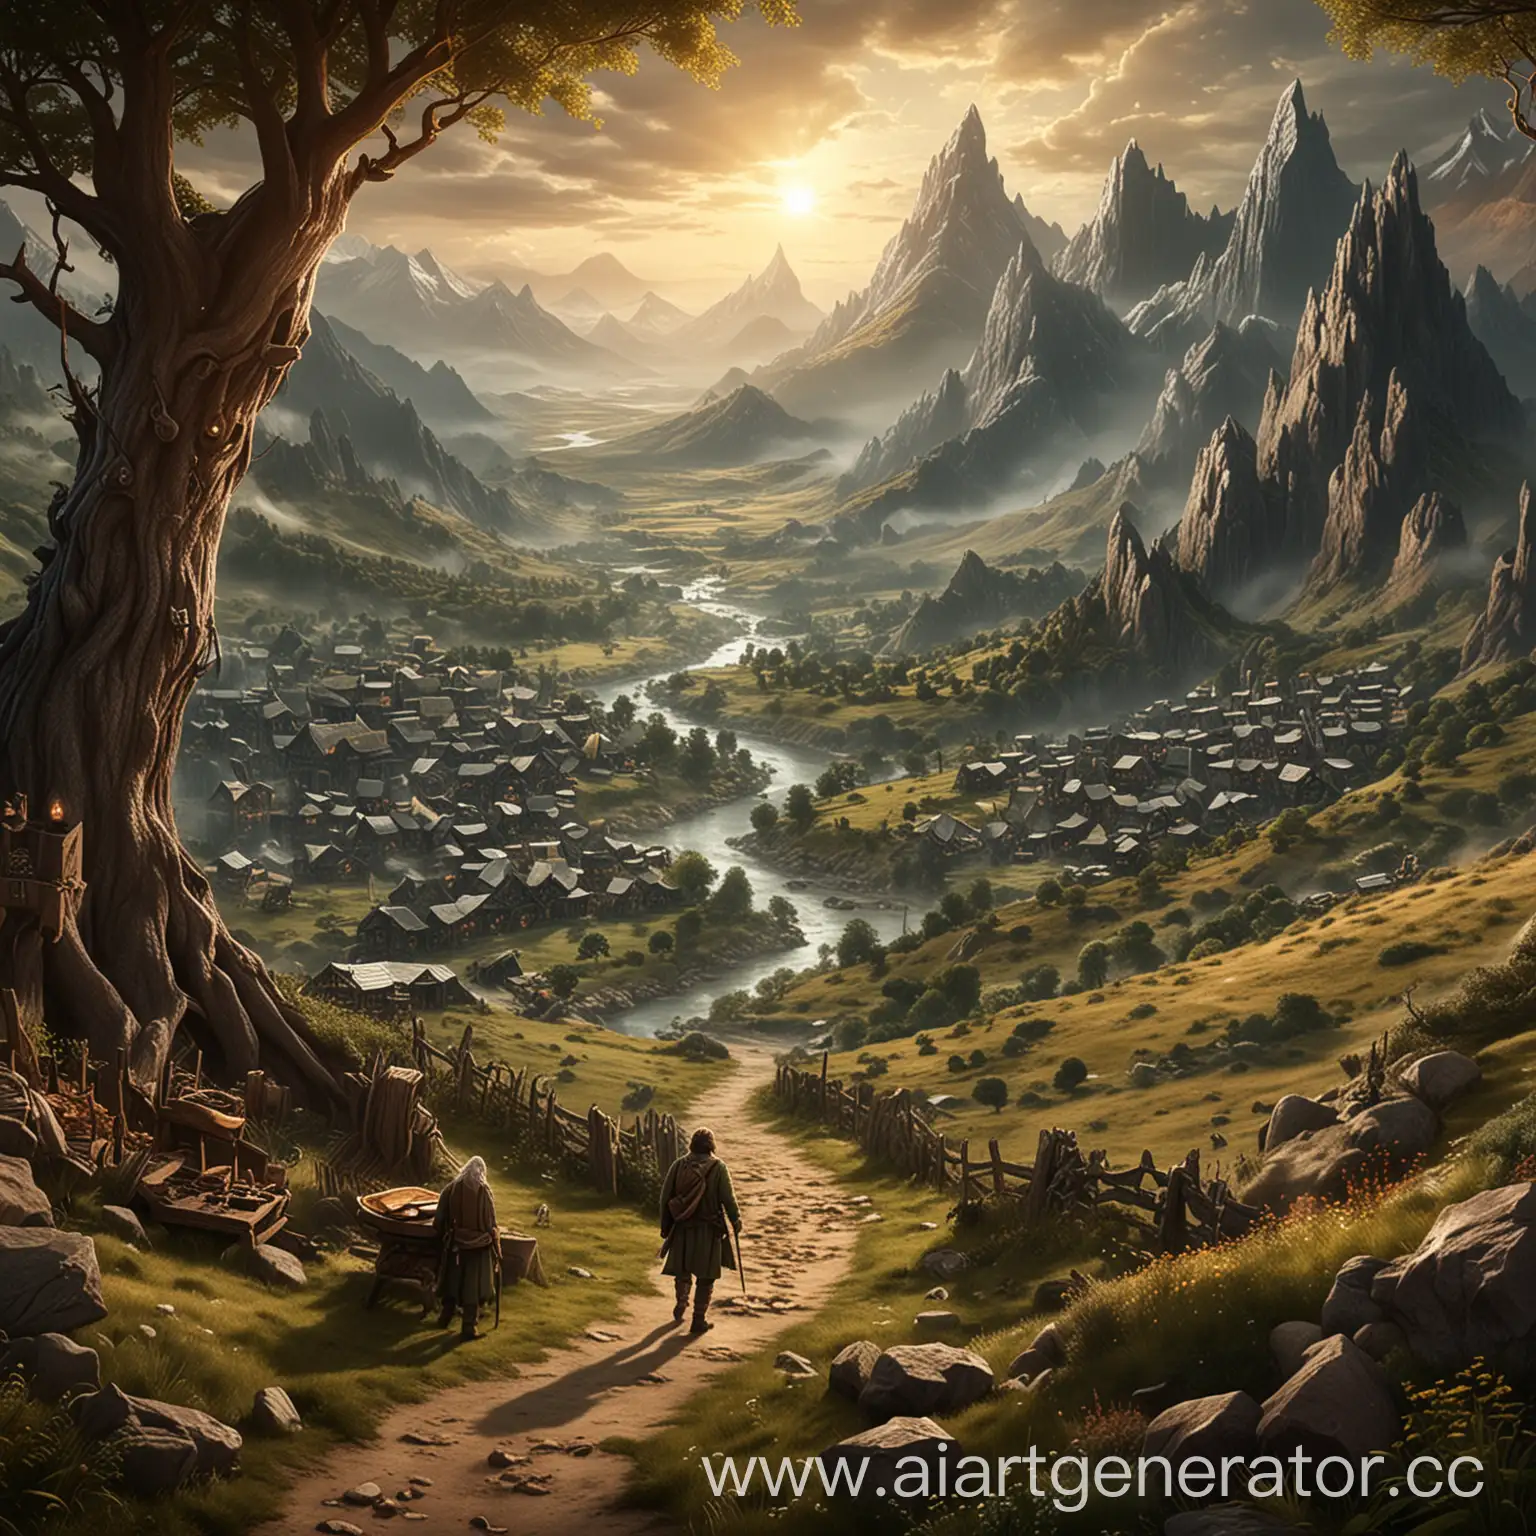 Hobbit-Playing-Computer-in-Middleearth-Style-Fantasy-Scene